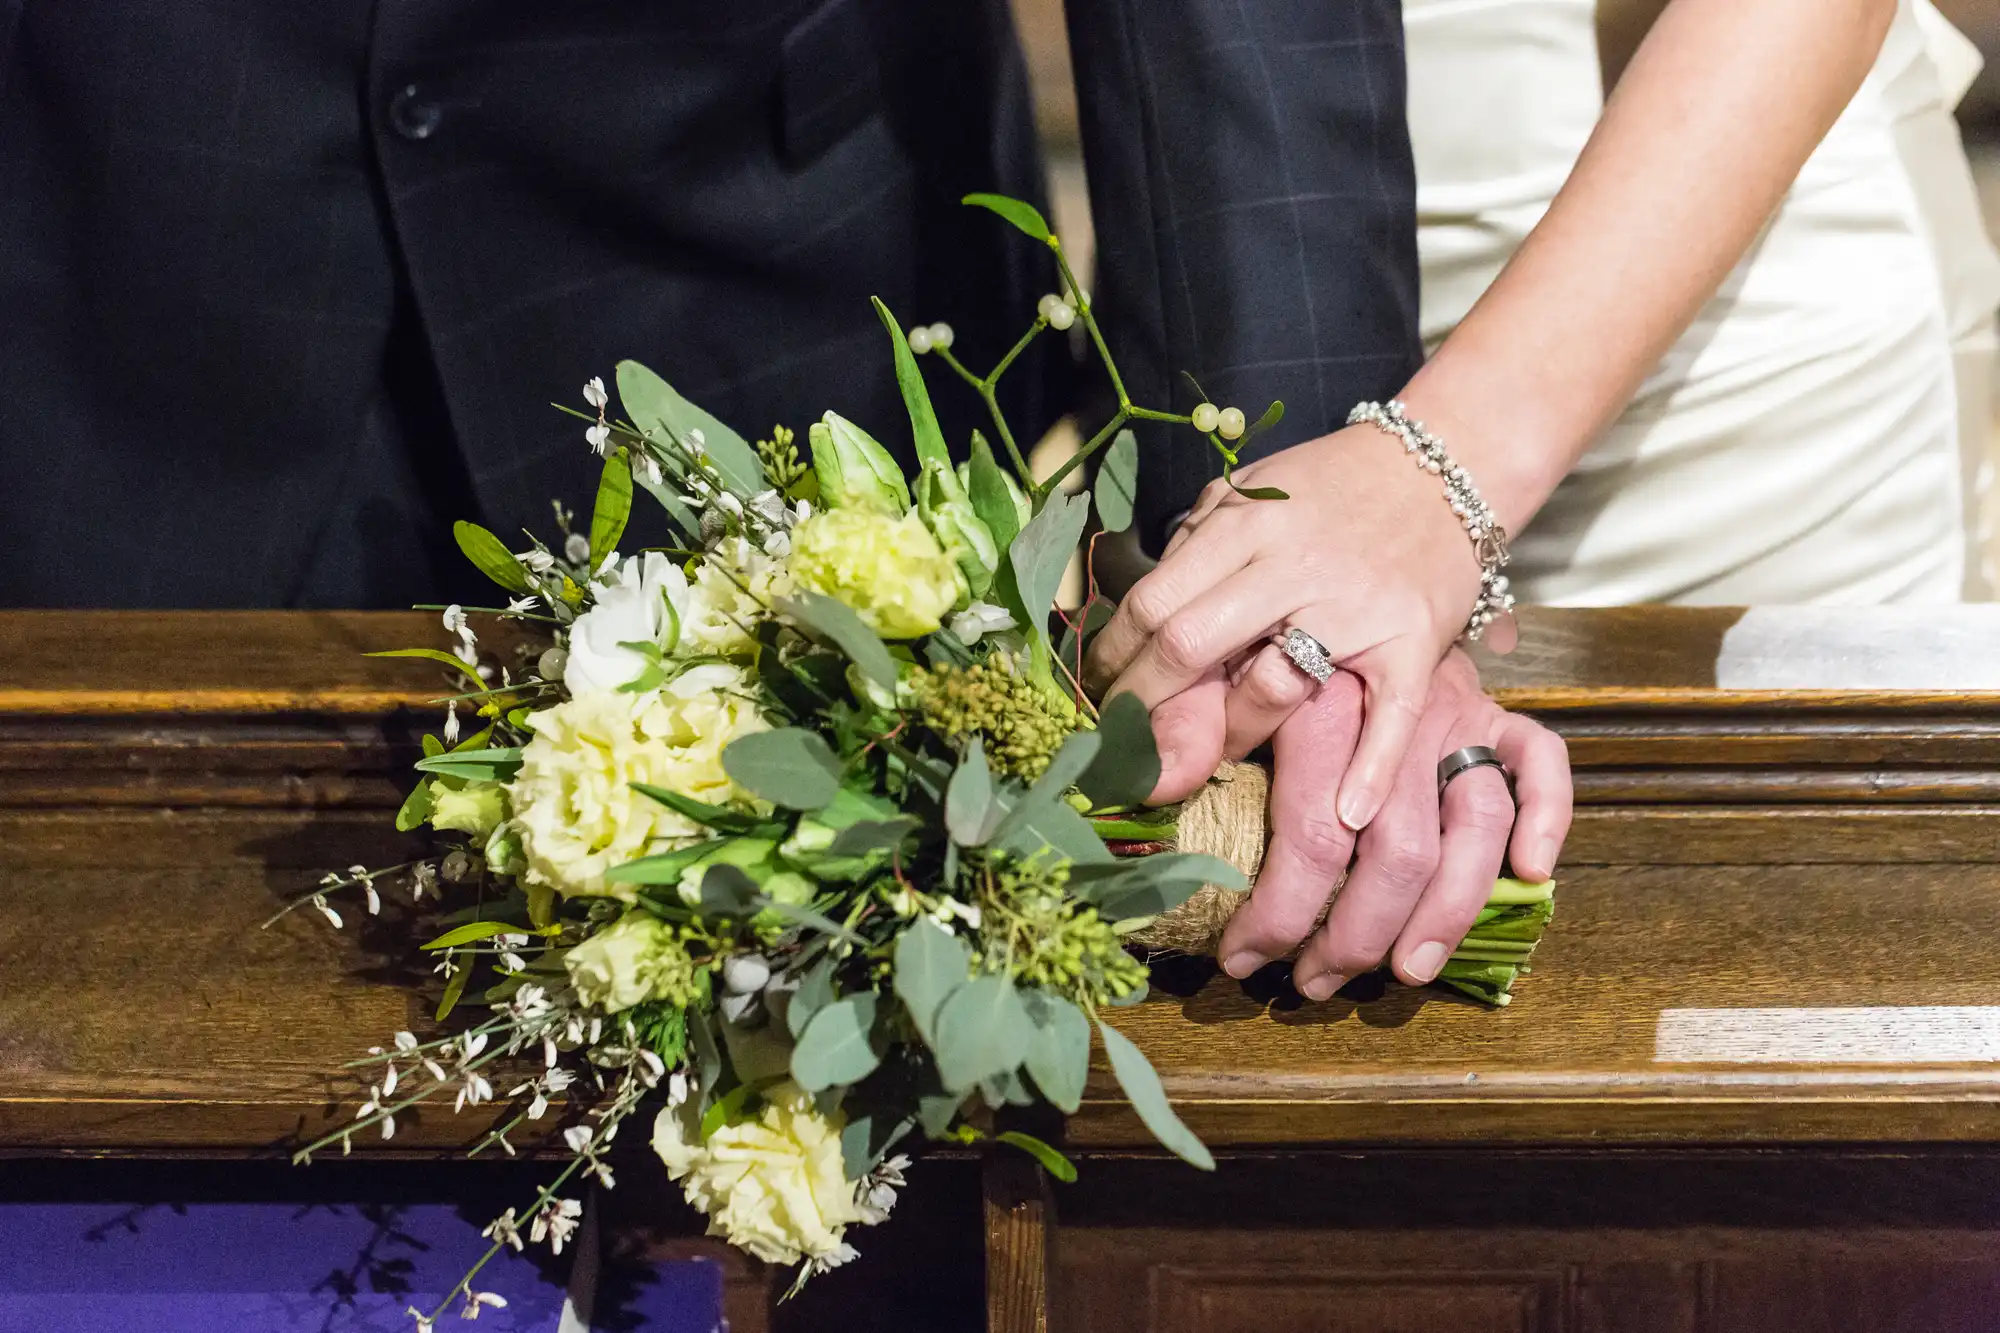 A newlywed couple gently holds hands over a church pew, showcasing their wedding rings and a bouquet of white and green flowers.